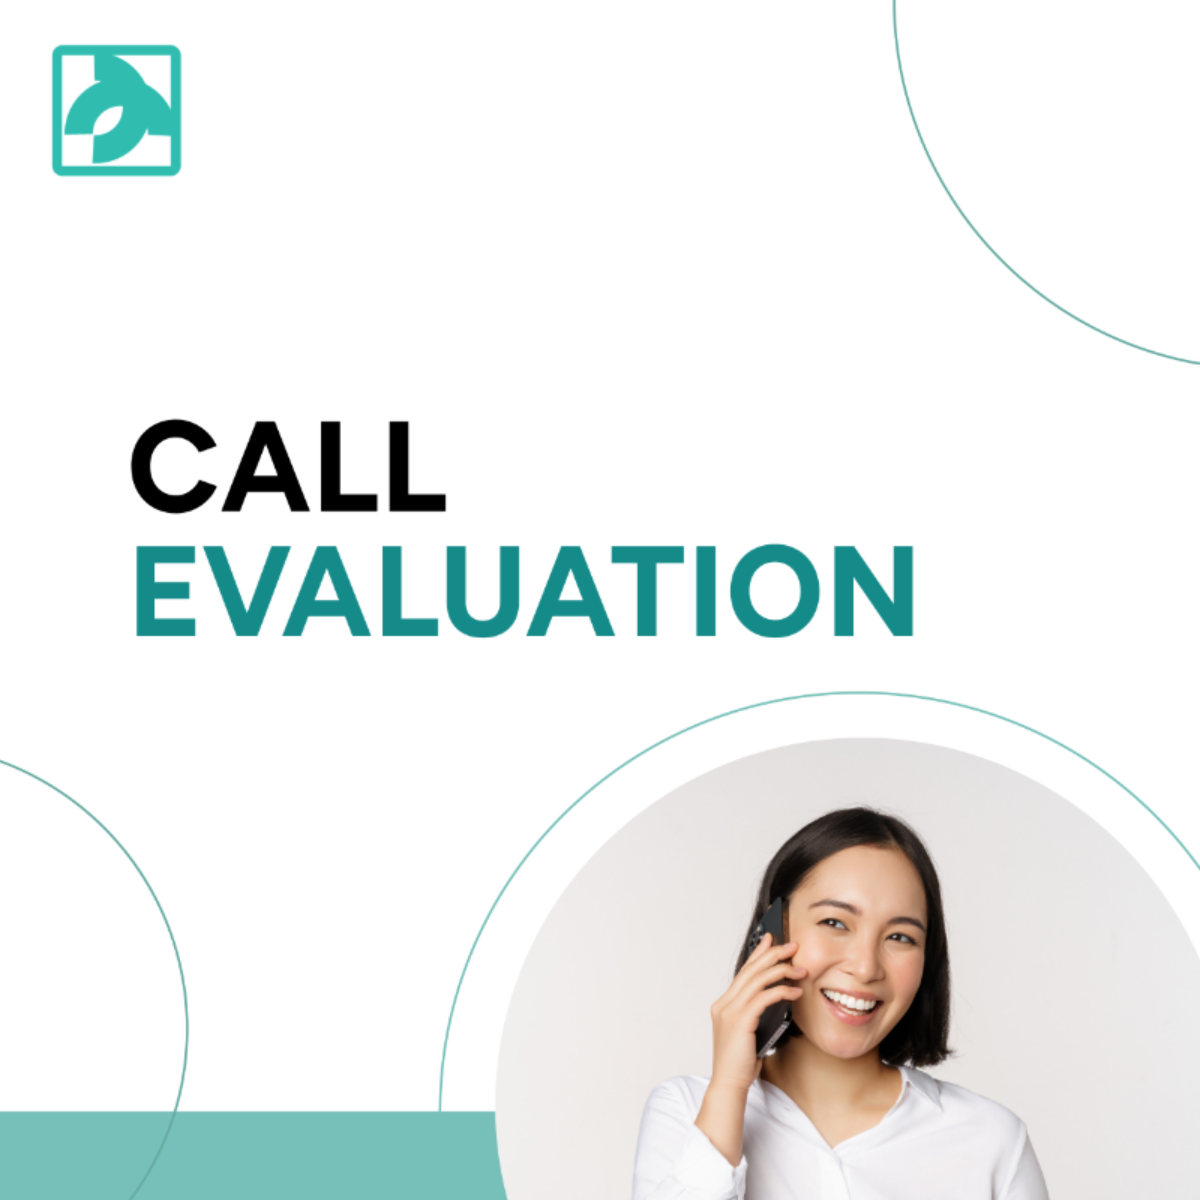 Call Evaluation Template